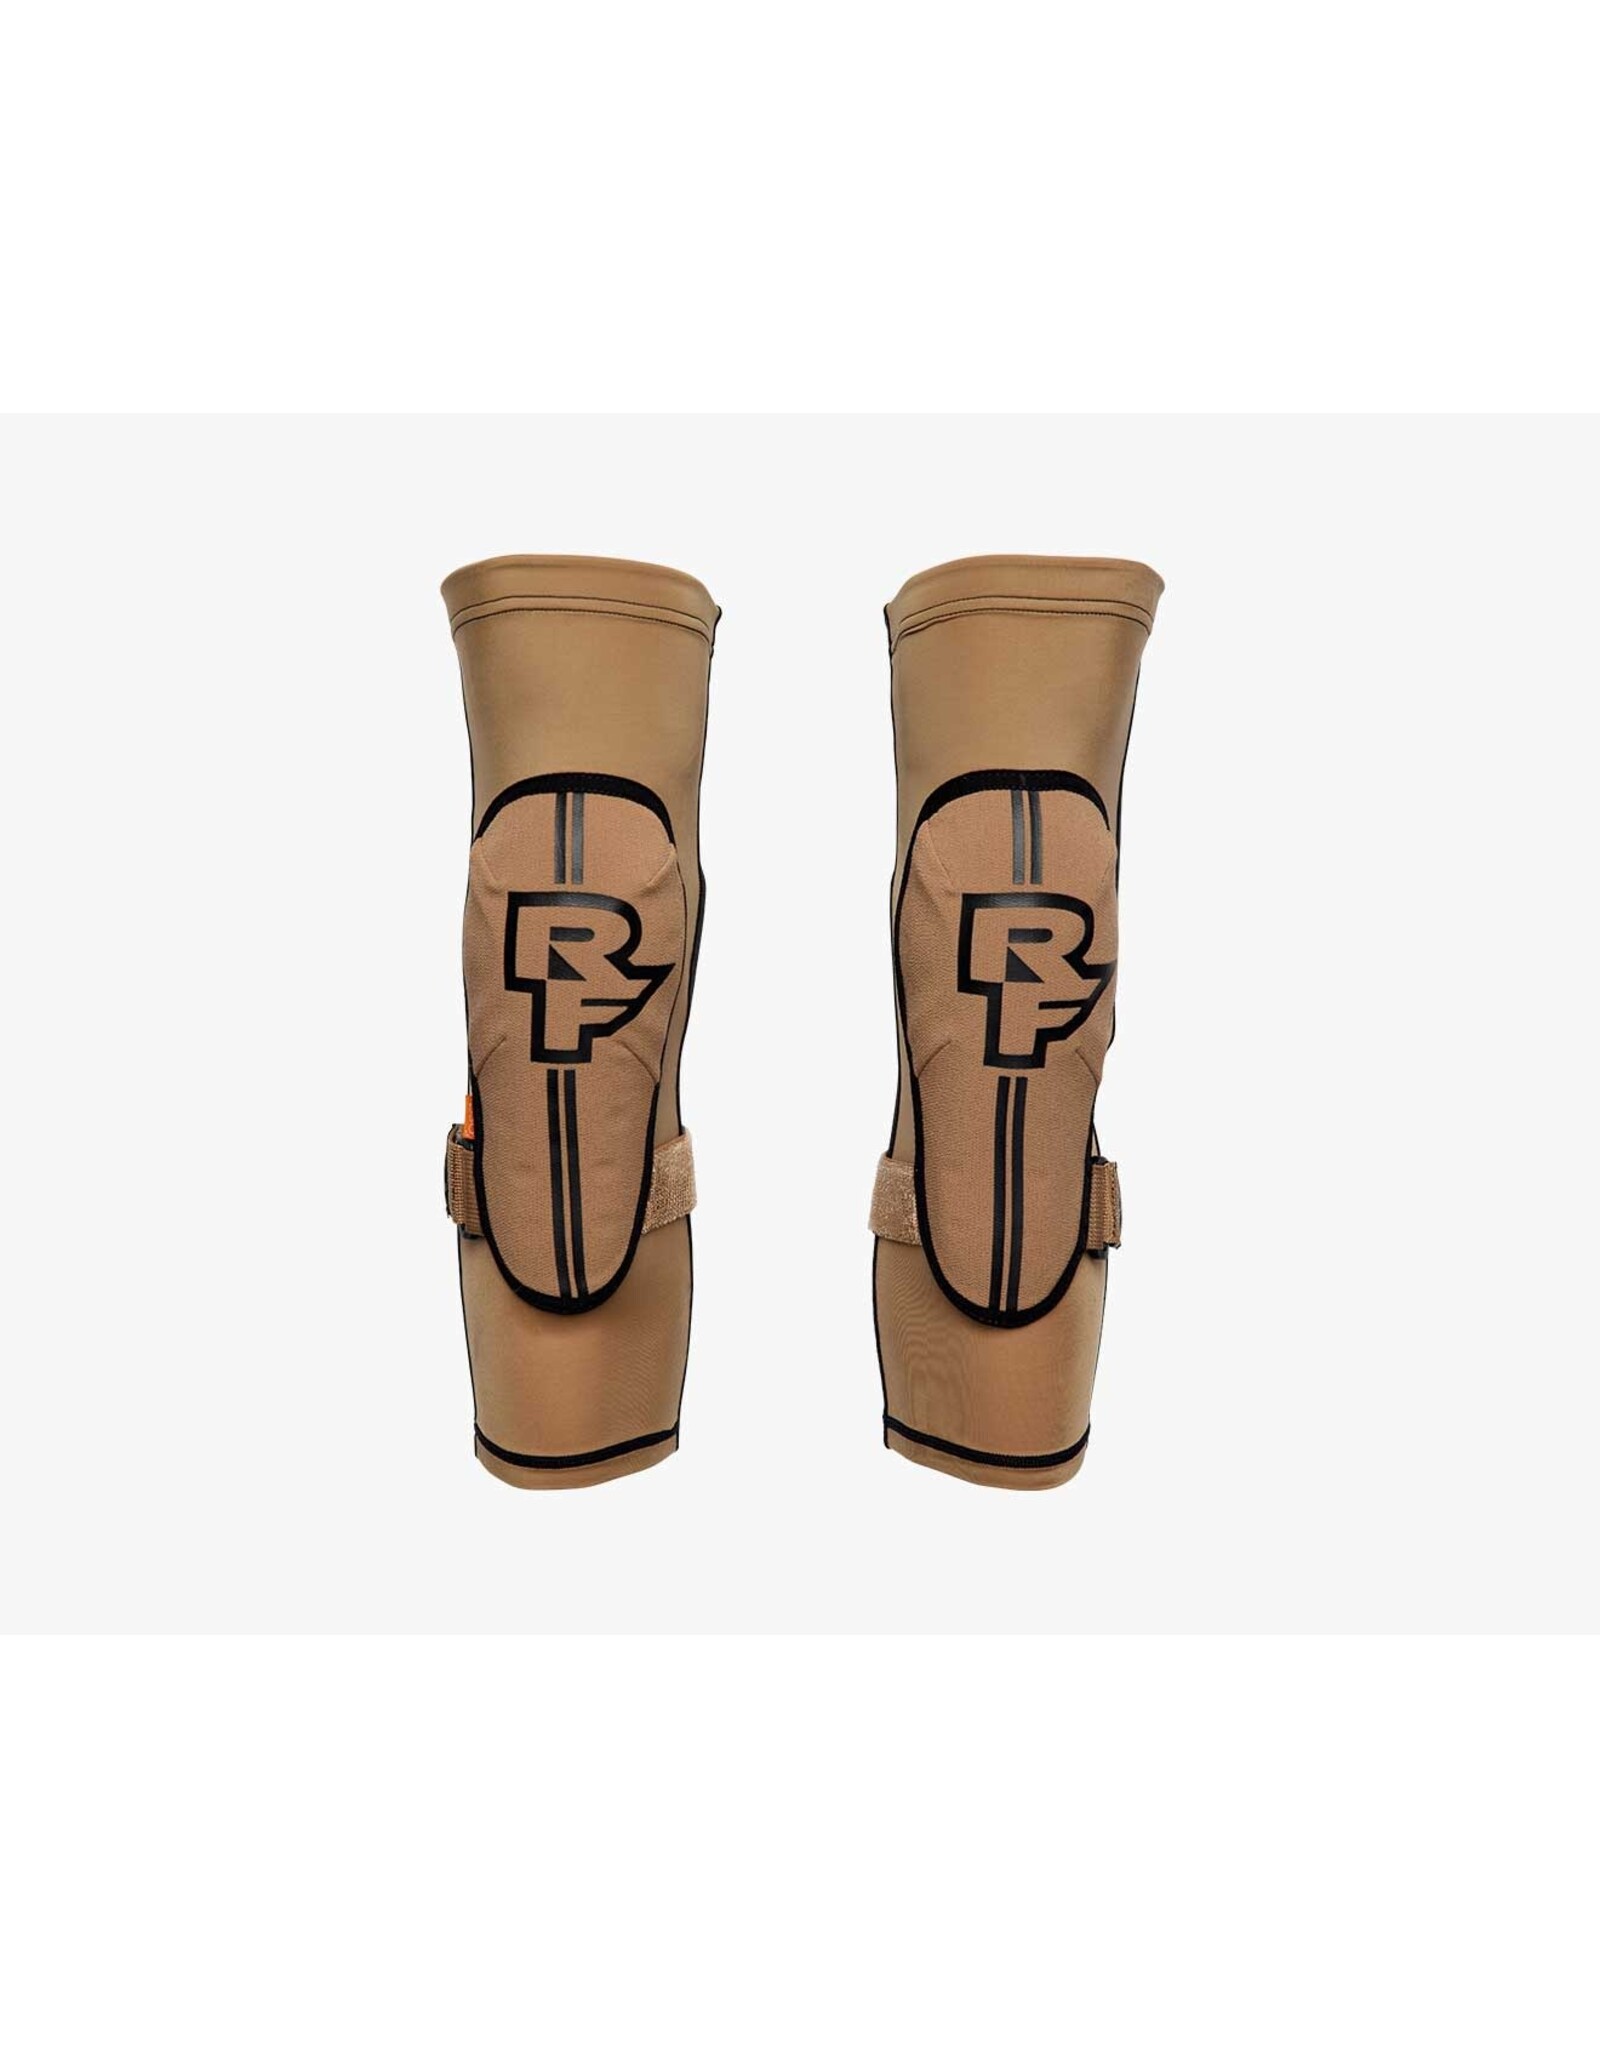 RACEFACE INDY KNEE PADS